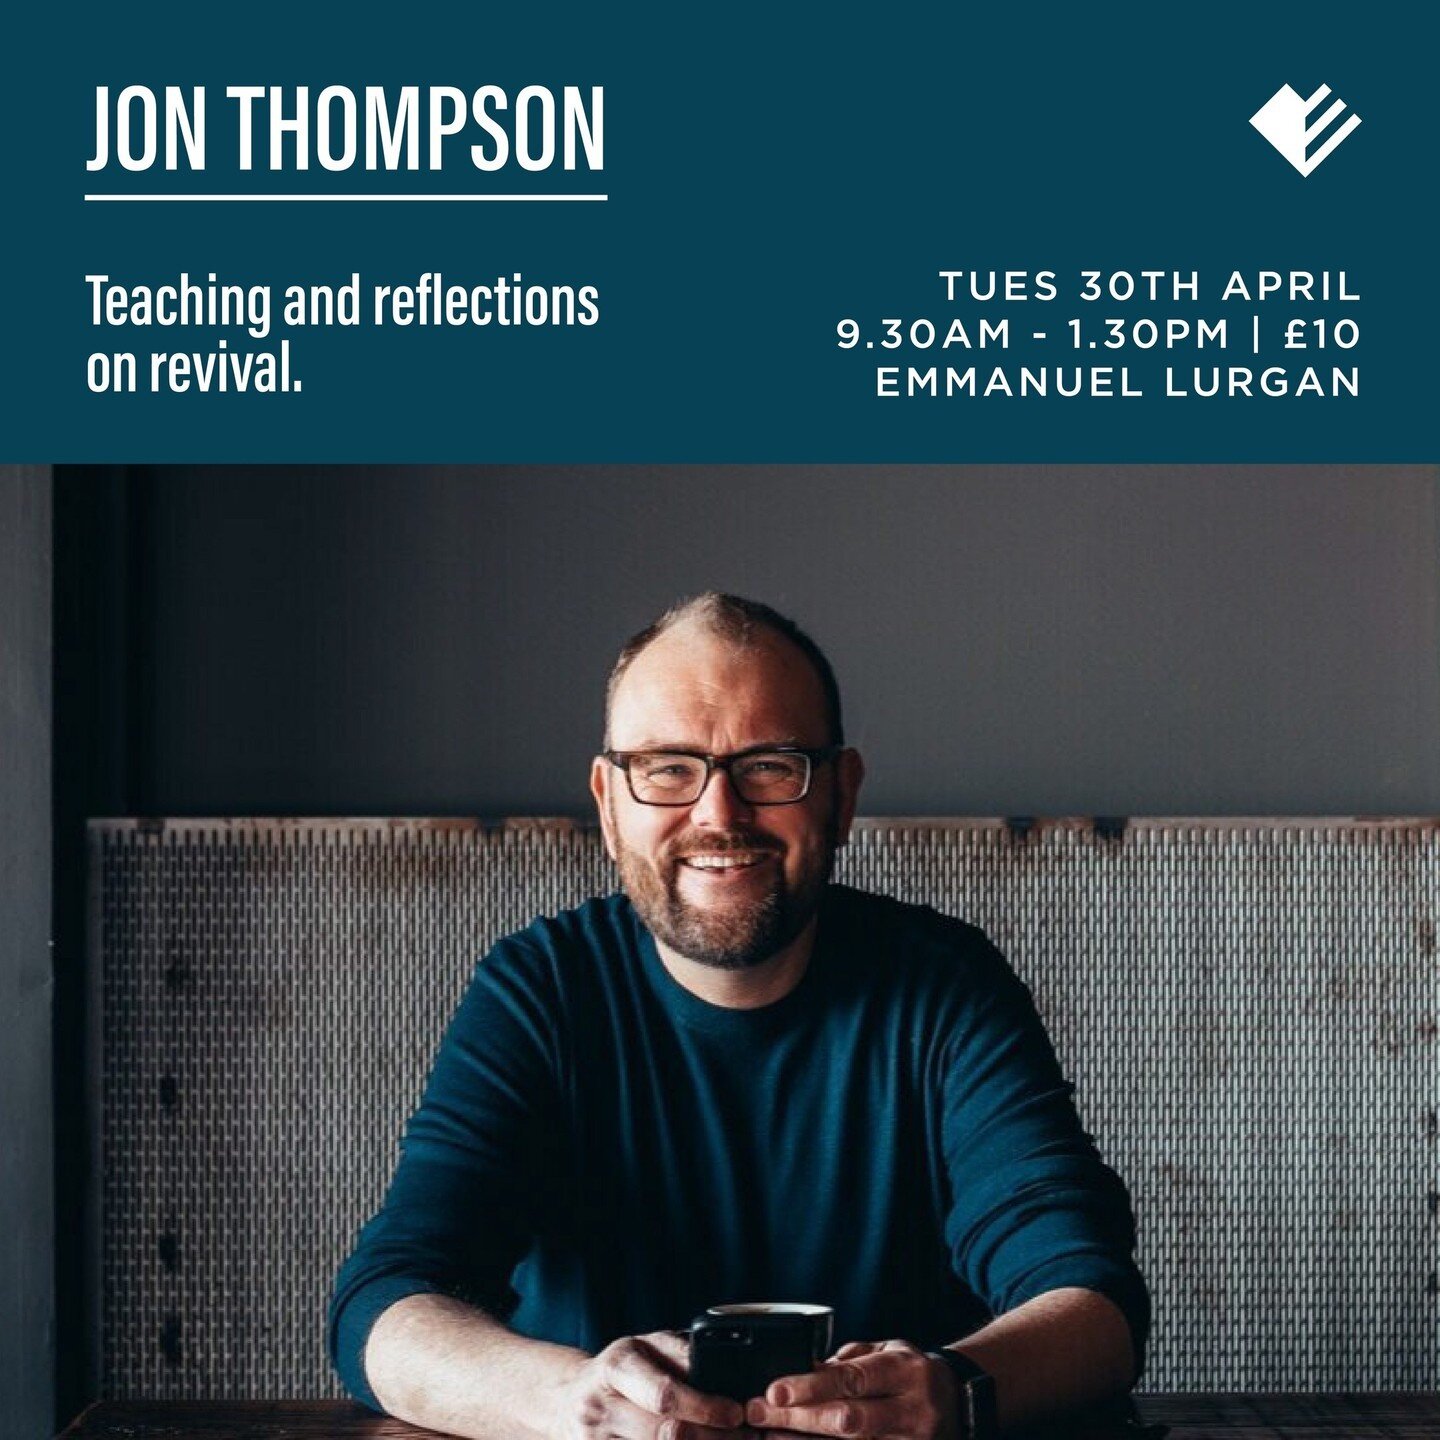 We are delighted to have Jon Thompson with is, on Tuesday 30th April we are going to host two sessions on the subject of revival. A number of years ago, Sanctus Church, where Jon serves, experienced a genuine move of the Spirit and has documented acc